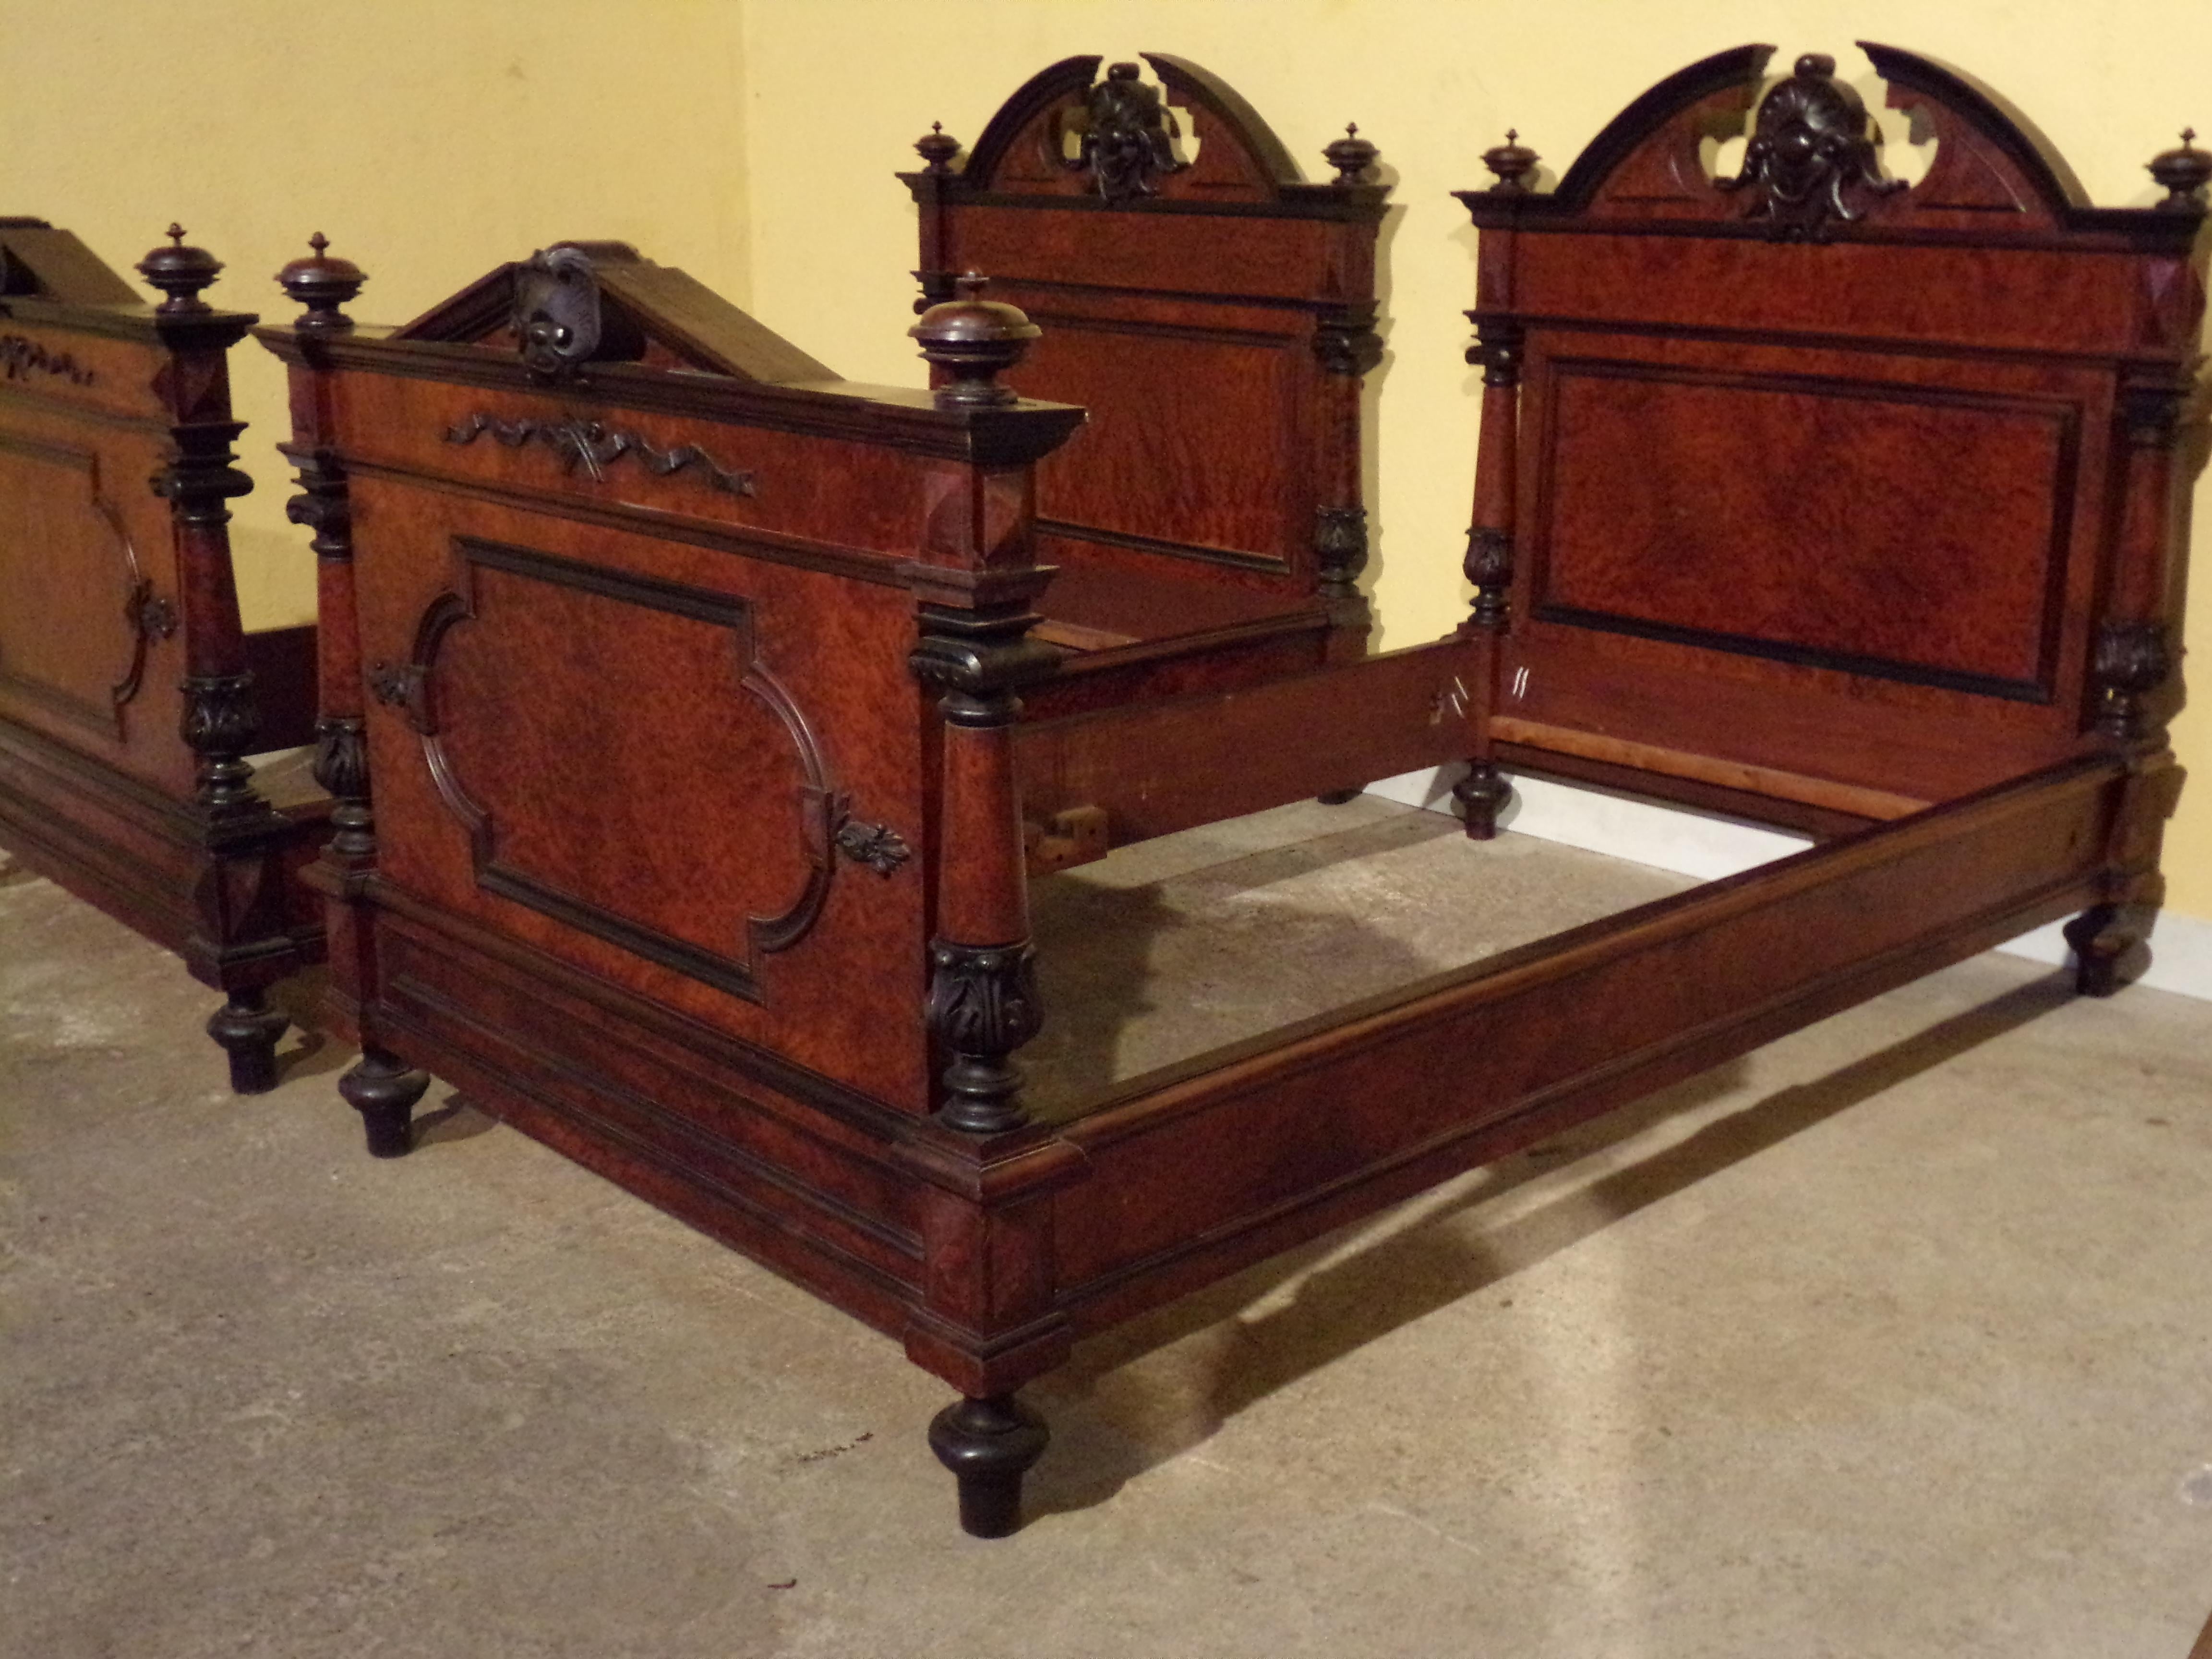 An outstanding and rare pair of Portuguese Amboyna and ebonised beds circa 1870 this fine pair will make a statement in any bedroom.
Size:
Height of headboard 48